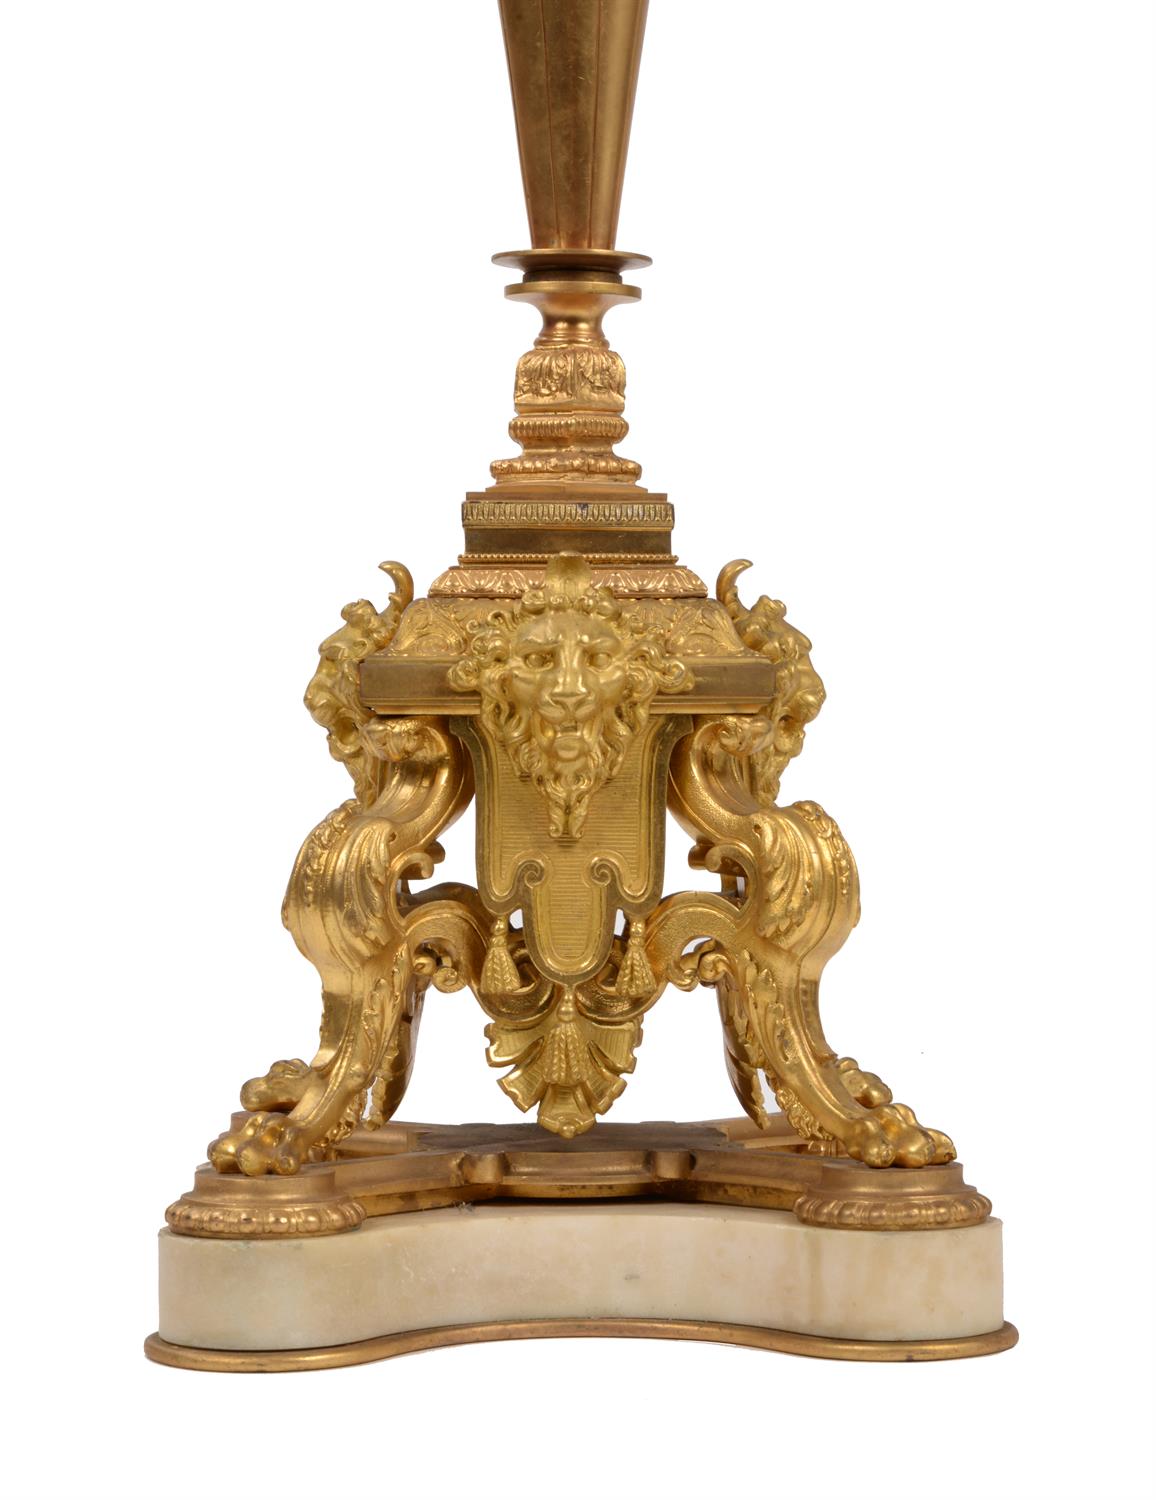 A French gilt bronze, cut glass and white marble mounted centre piece, third quarter 19th century - Image 3 of 4